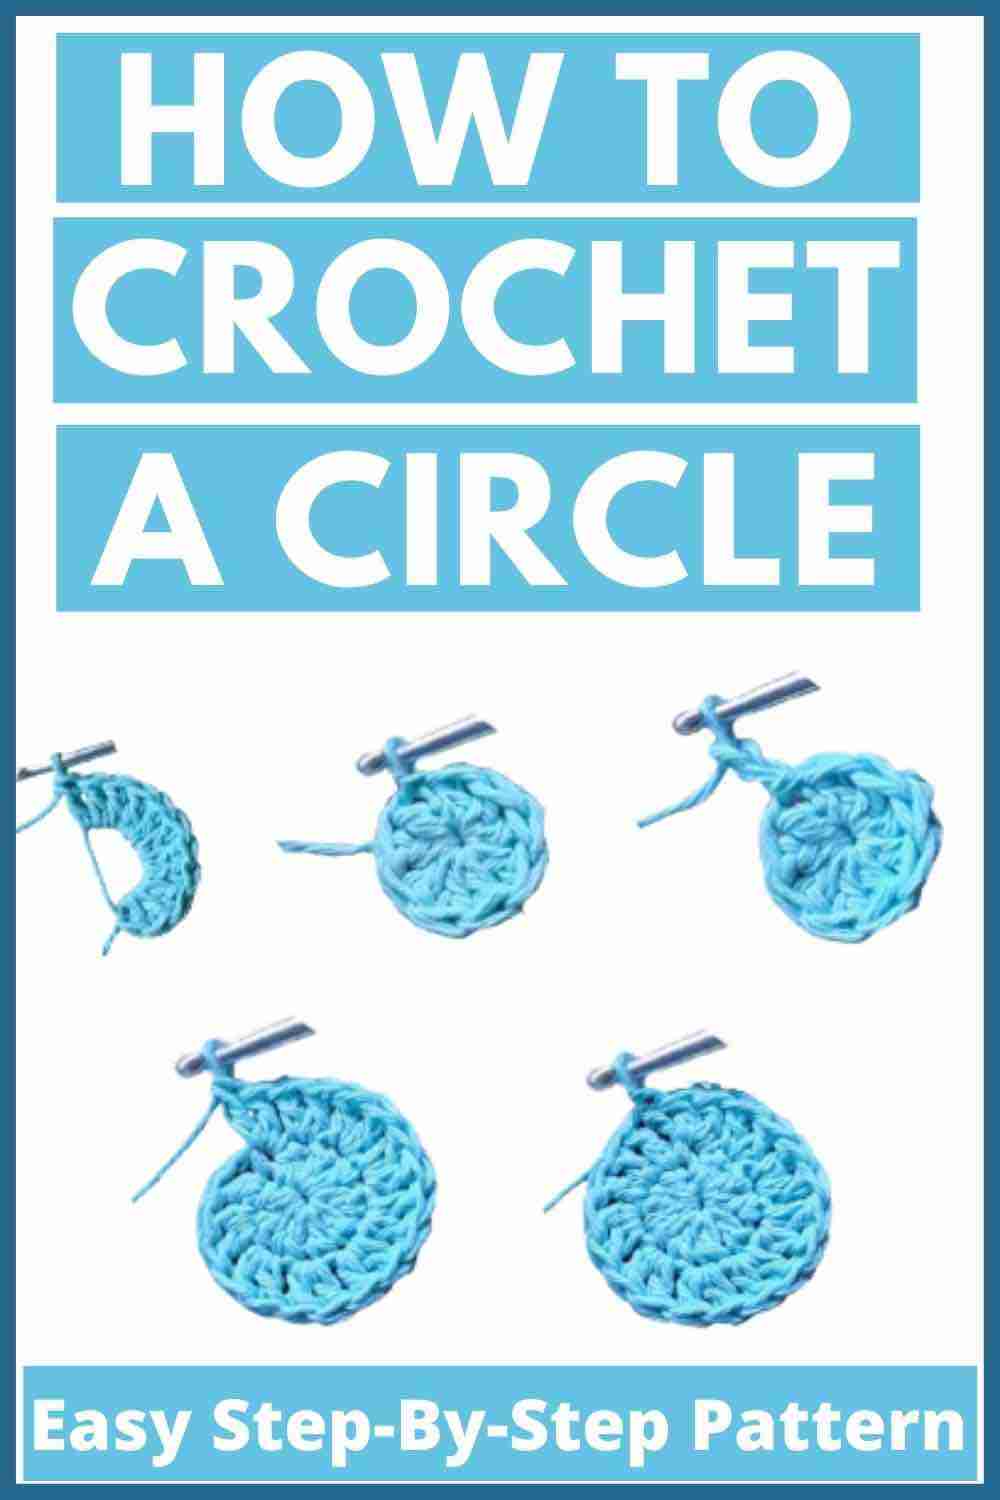 How-to-crochet-flat-circle-step-by-step